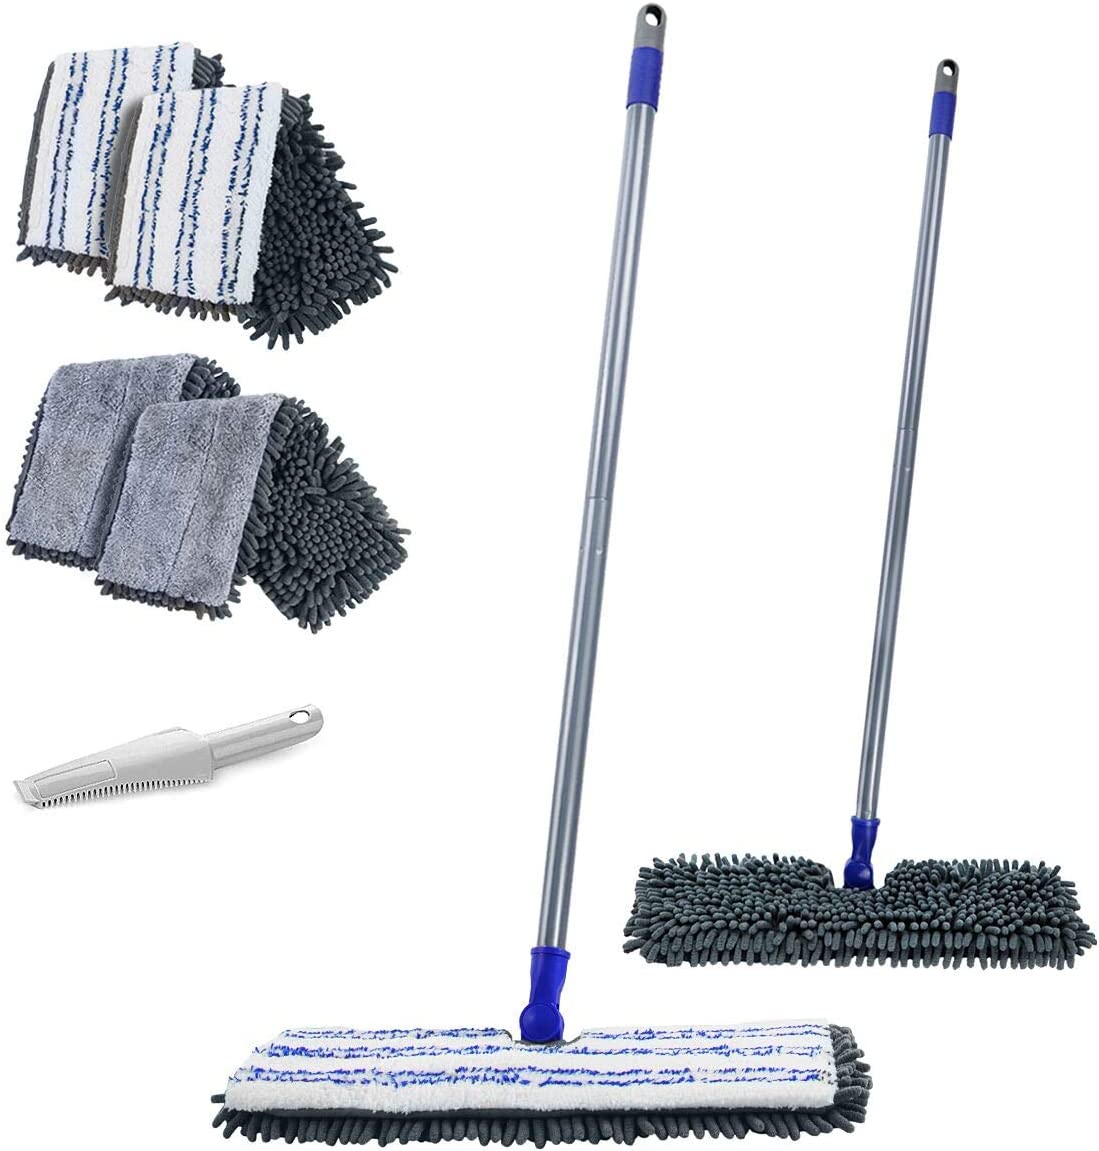 MASTERTOP Two Sided Dust Mop Floor Cleaning System - [...]